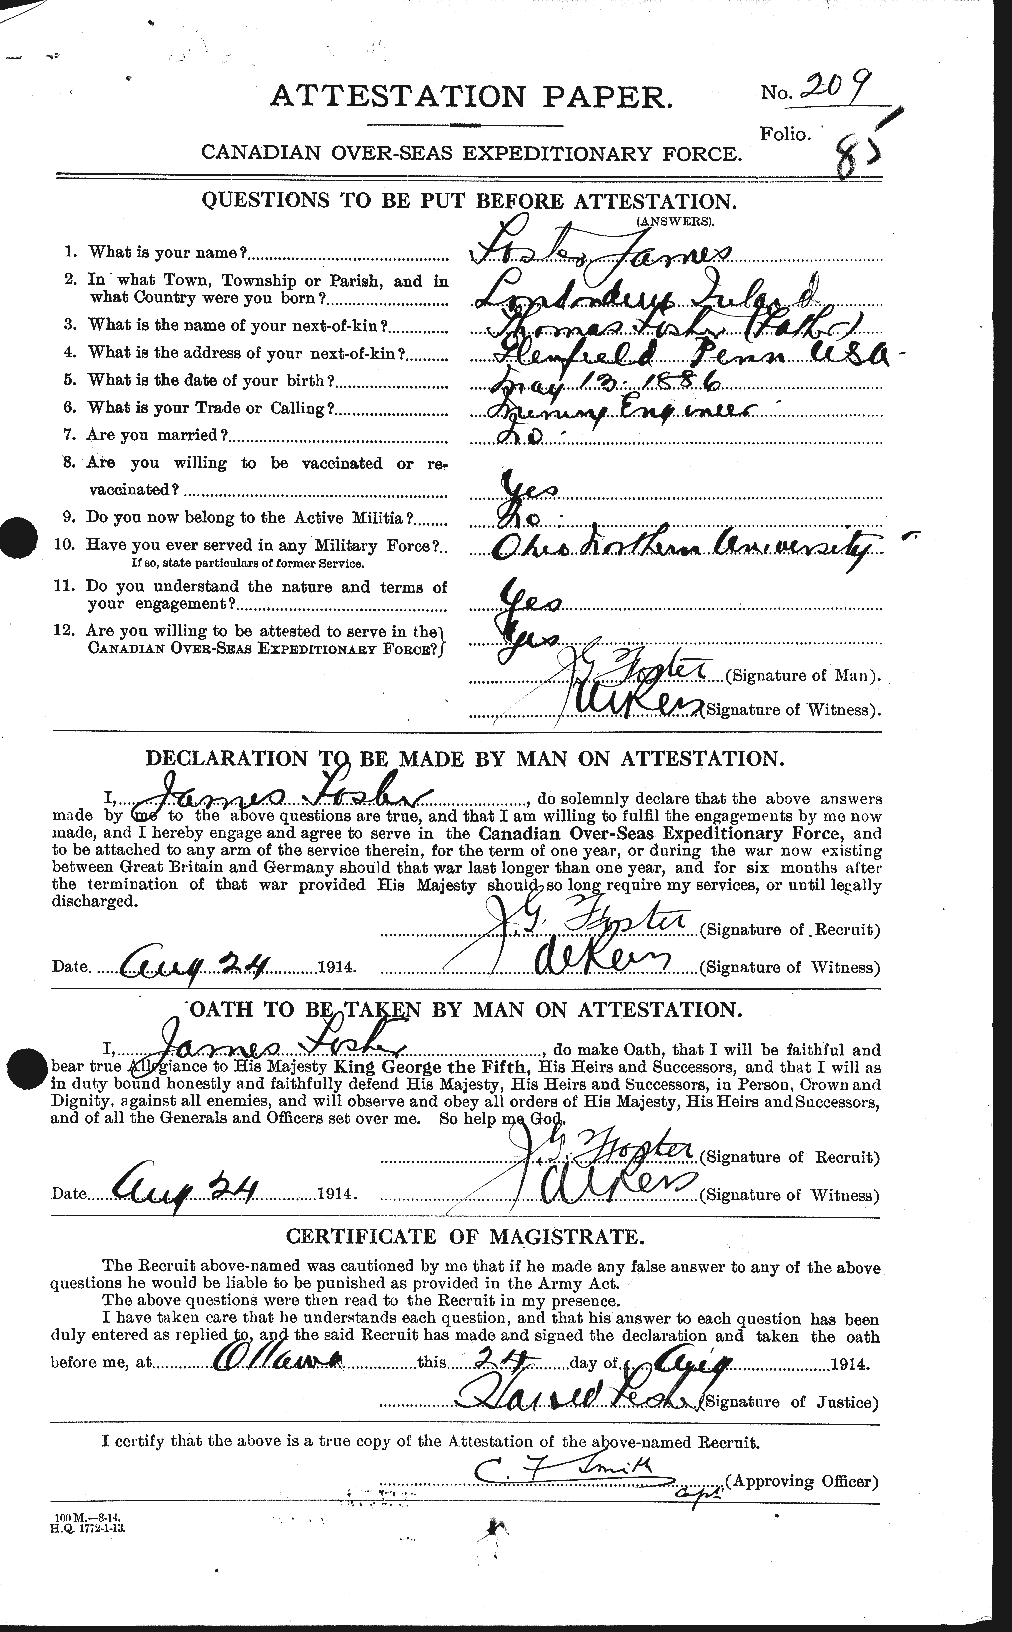 Personnel Records of the First World War - CEF 333293a